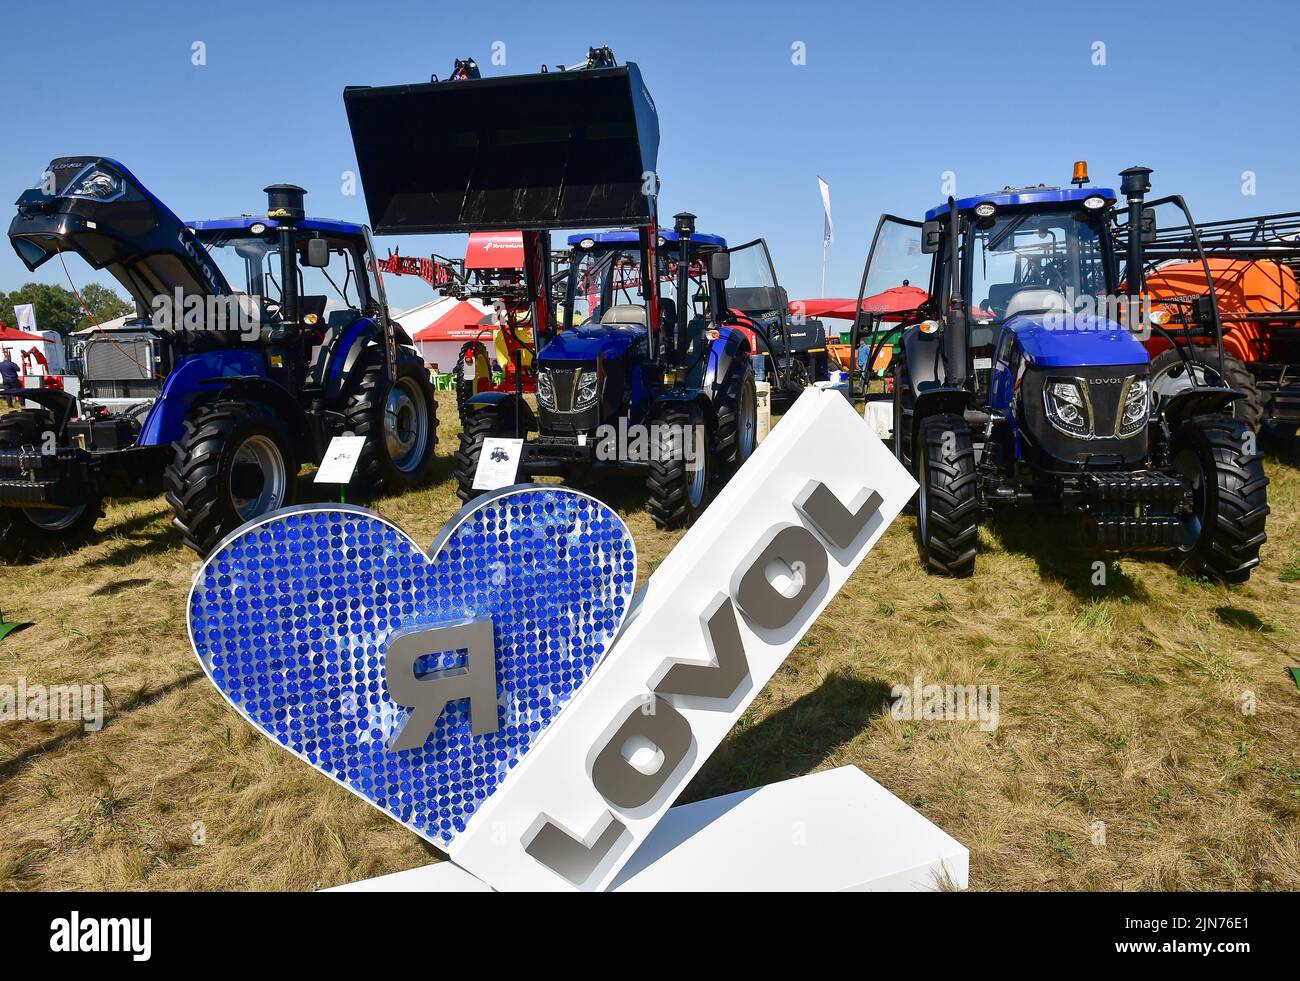 Regional demonstration site of modern technologies in agricultural production 'Field Day 2022' in Novosibirsk. Genre photography. Exhibition of agricultural machinery. 05.08.2022 Russia, Novosibirsk Photo credit: Vlad Nekrasov/Kommersant/Sipa USA Stock Photo